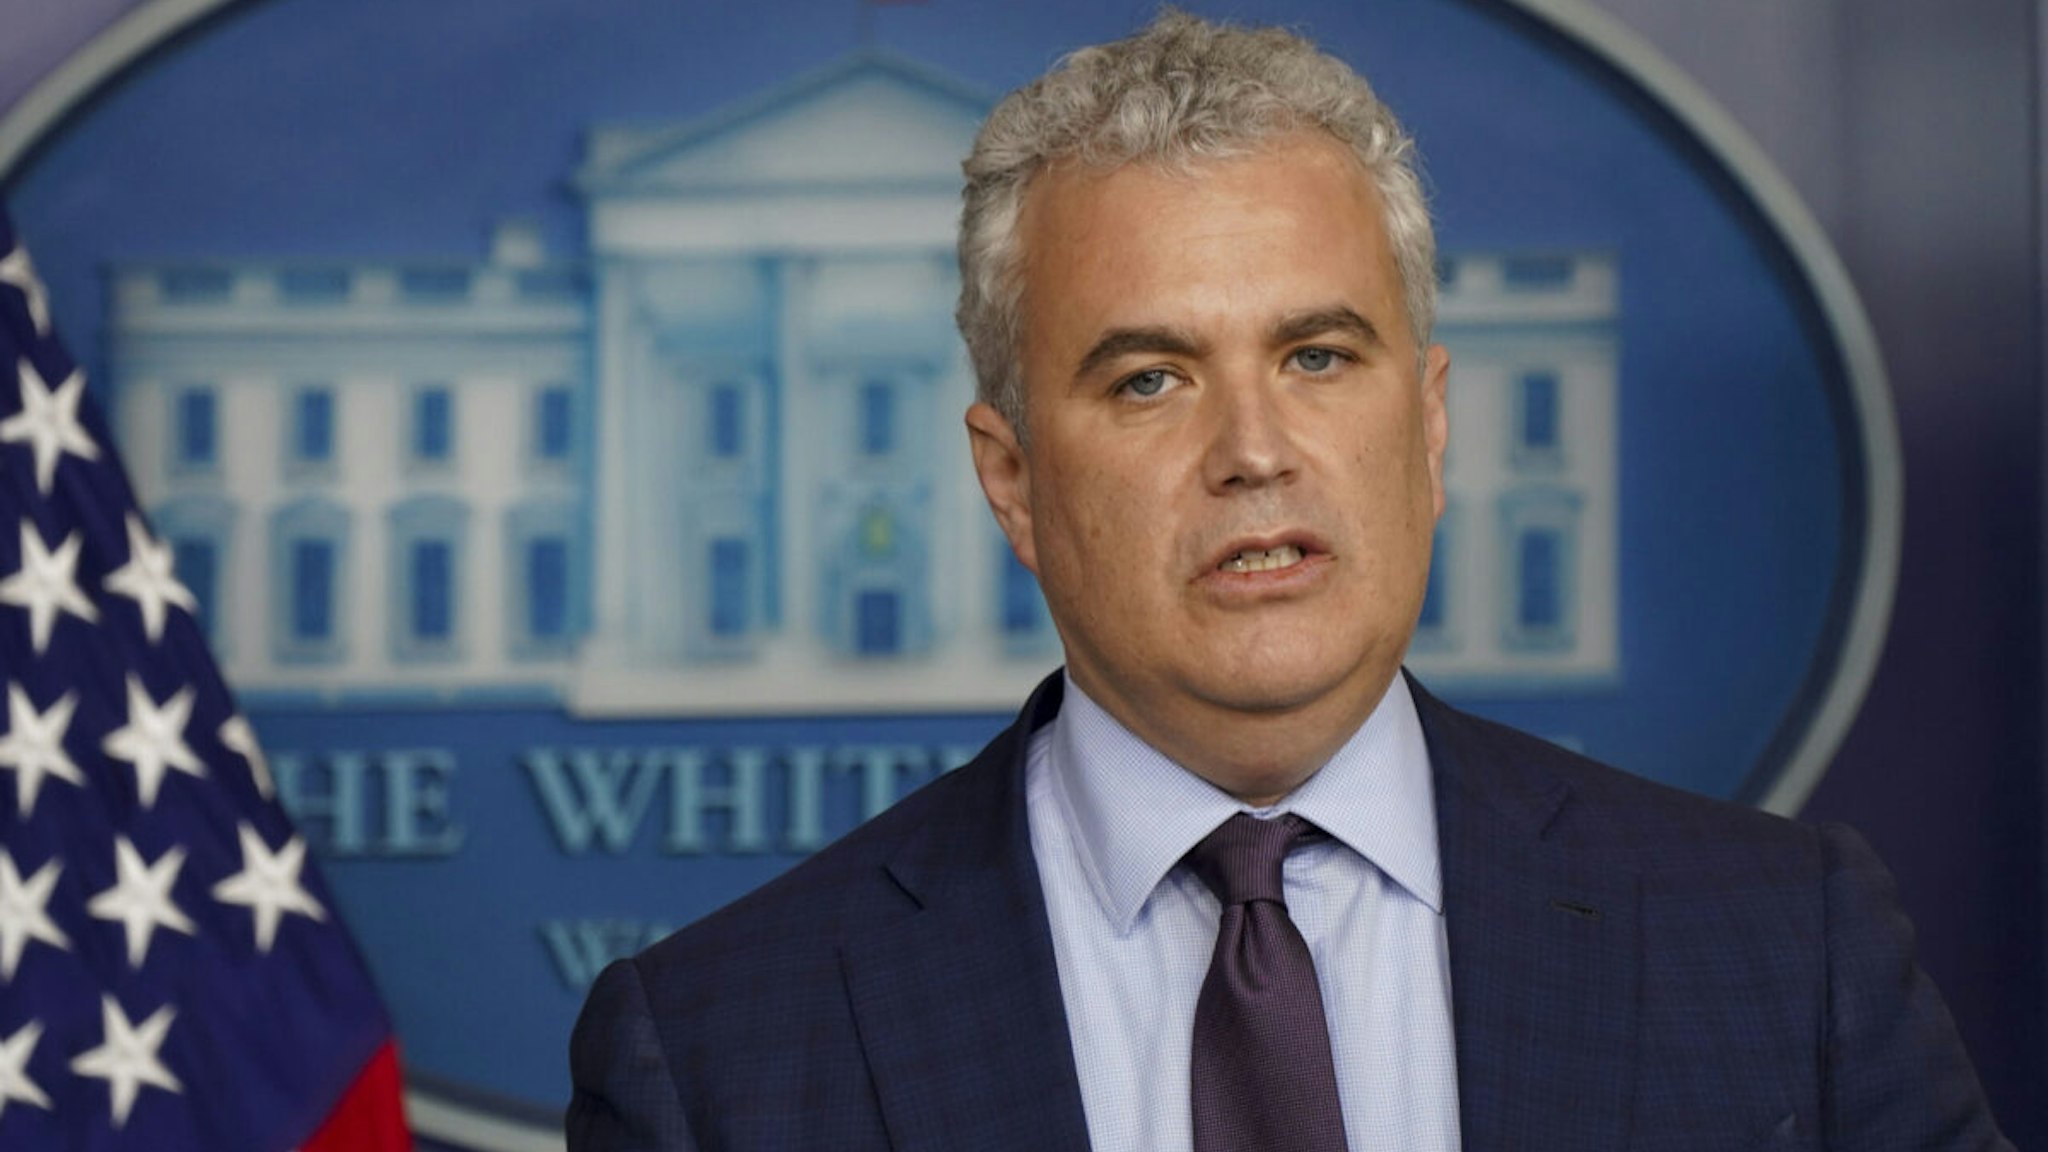 Jeff Zients, White House Covid-19 coordinator, speaks during a news conference in the James S. Brady Press Briefing Room at the White House in Washington, D.C., U.S., on Tuesday, April 13, 2021.